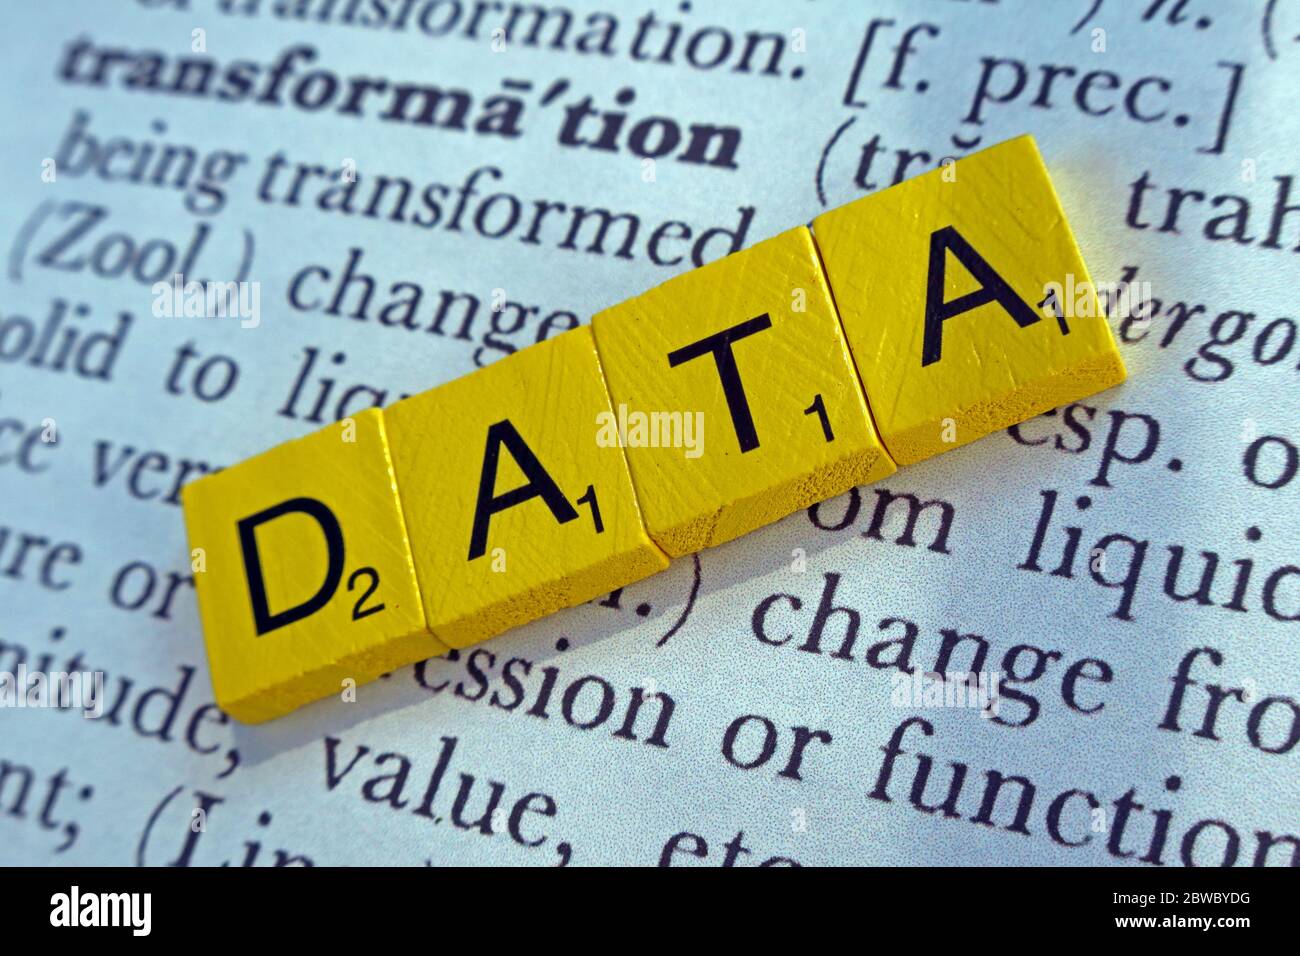 Transformation Of Data,Data Transformation, in Scrabble Letters Stock Photo